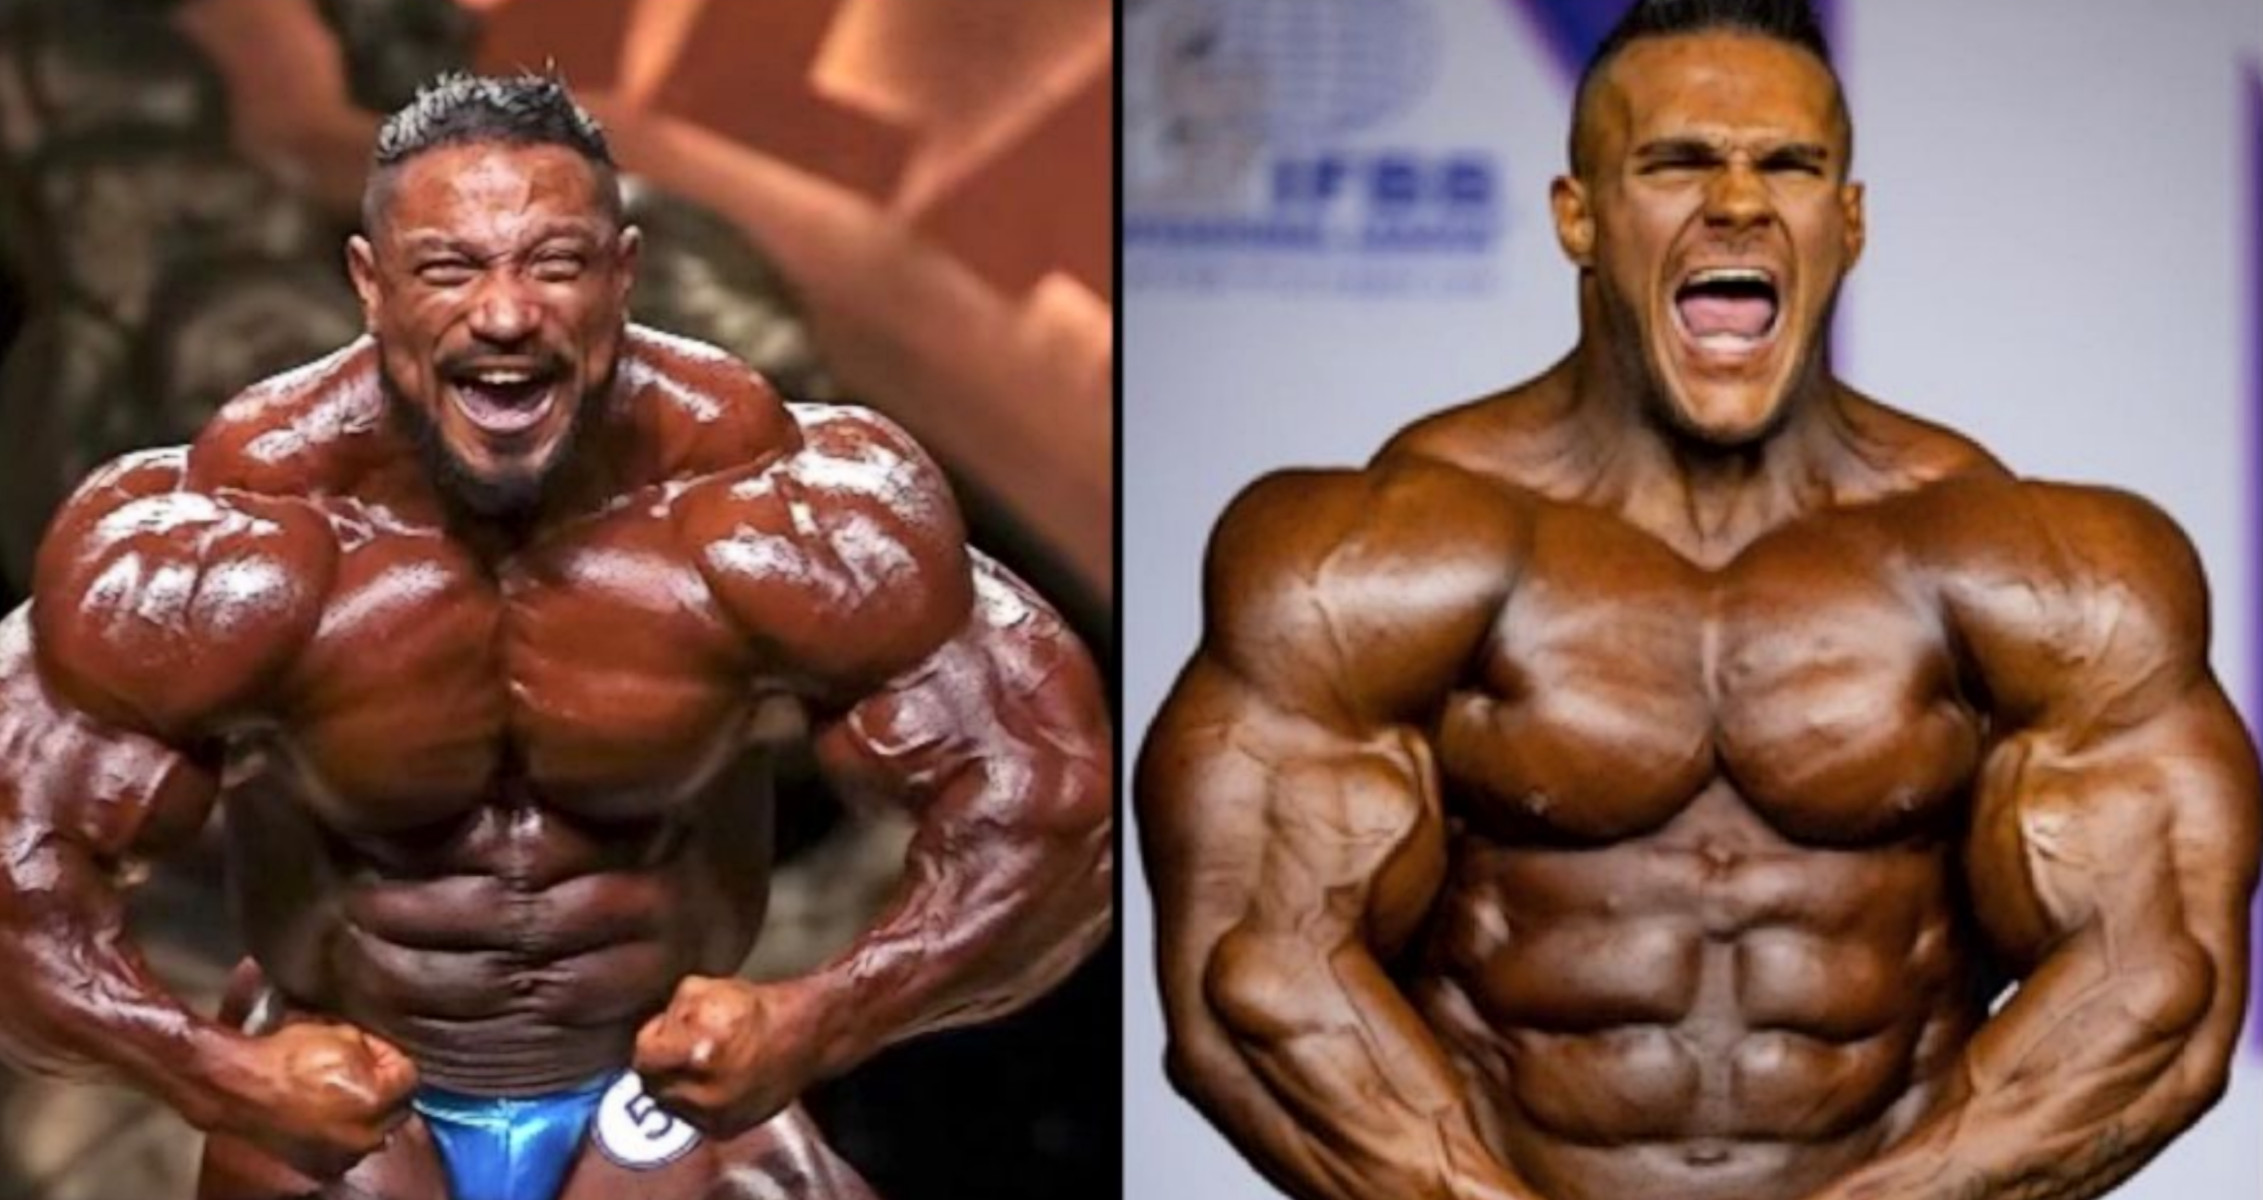 Get Ready For Pro Bodybuilders Roelly Winklaar vs Nick Walker at The 2021 Arnold Classic!